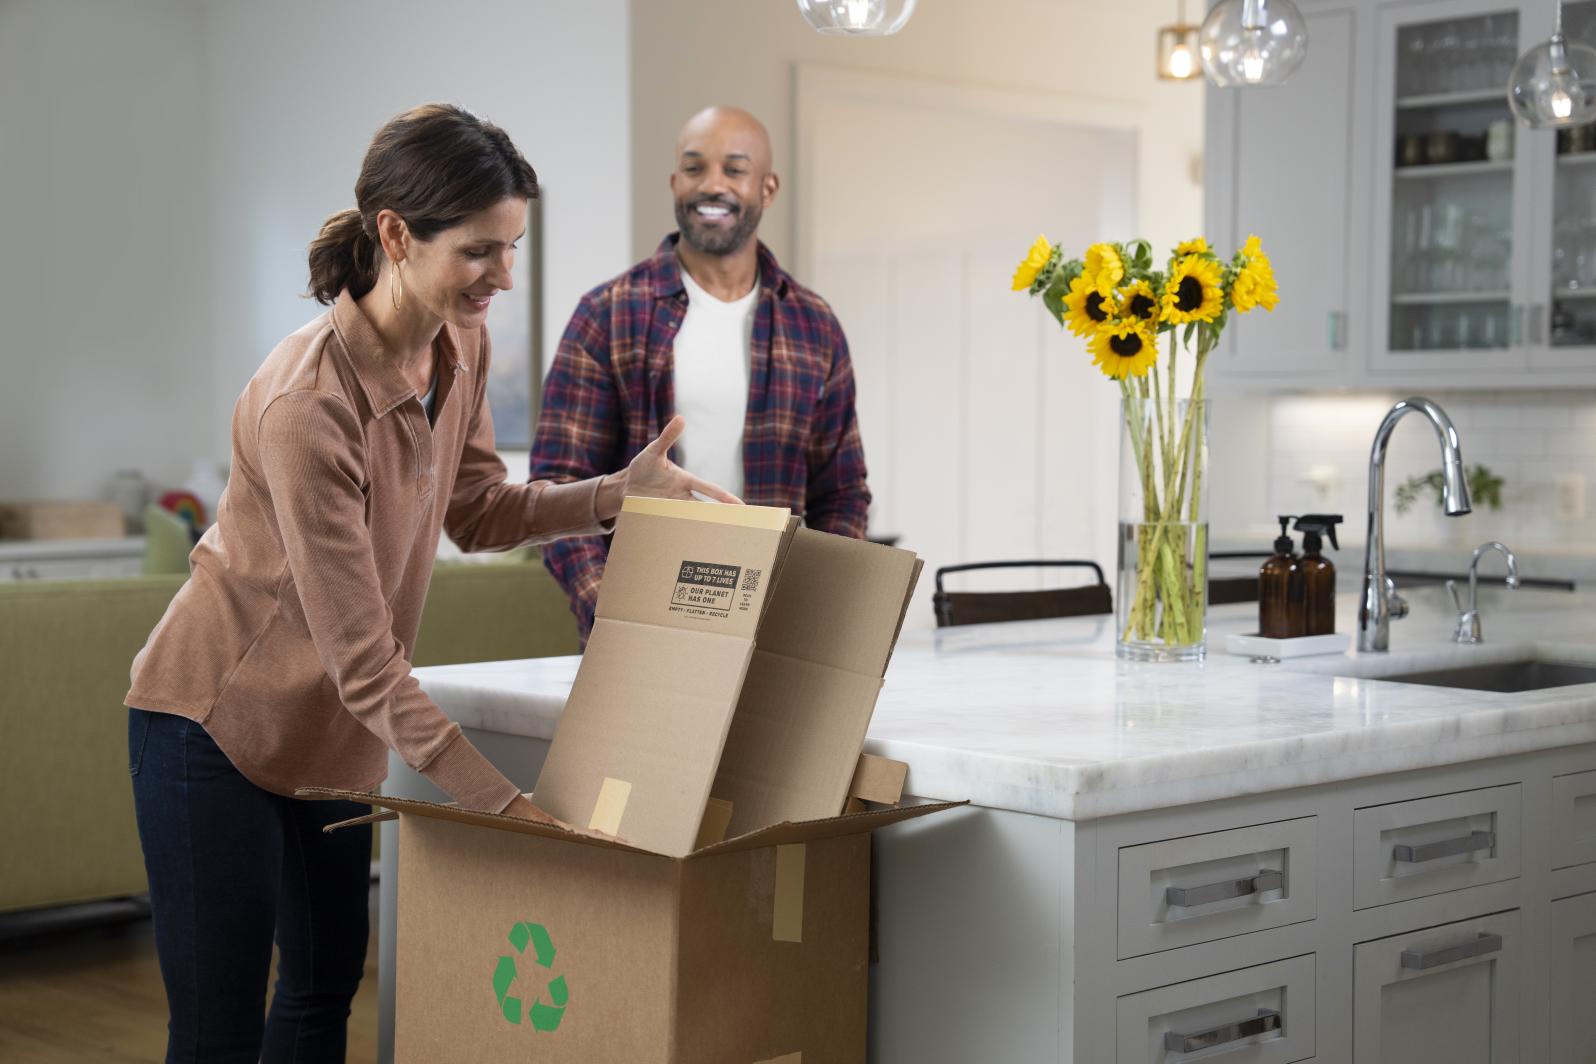 Women recycling a flattened cardboard box at home